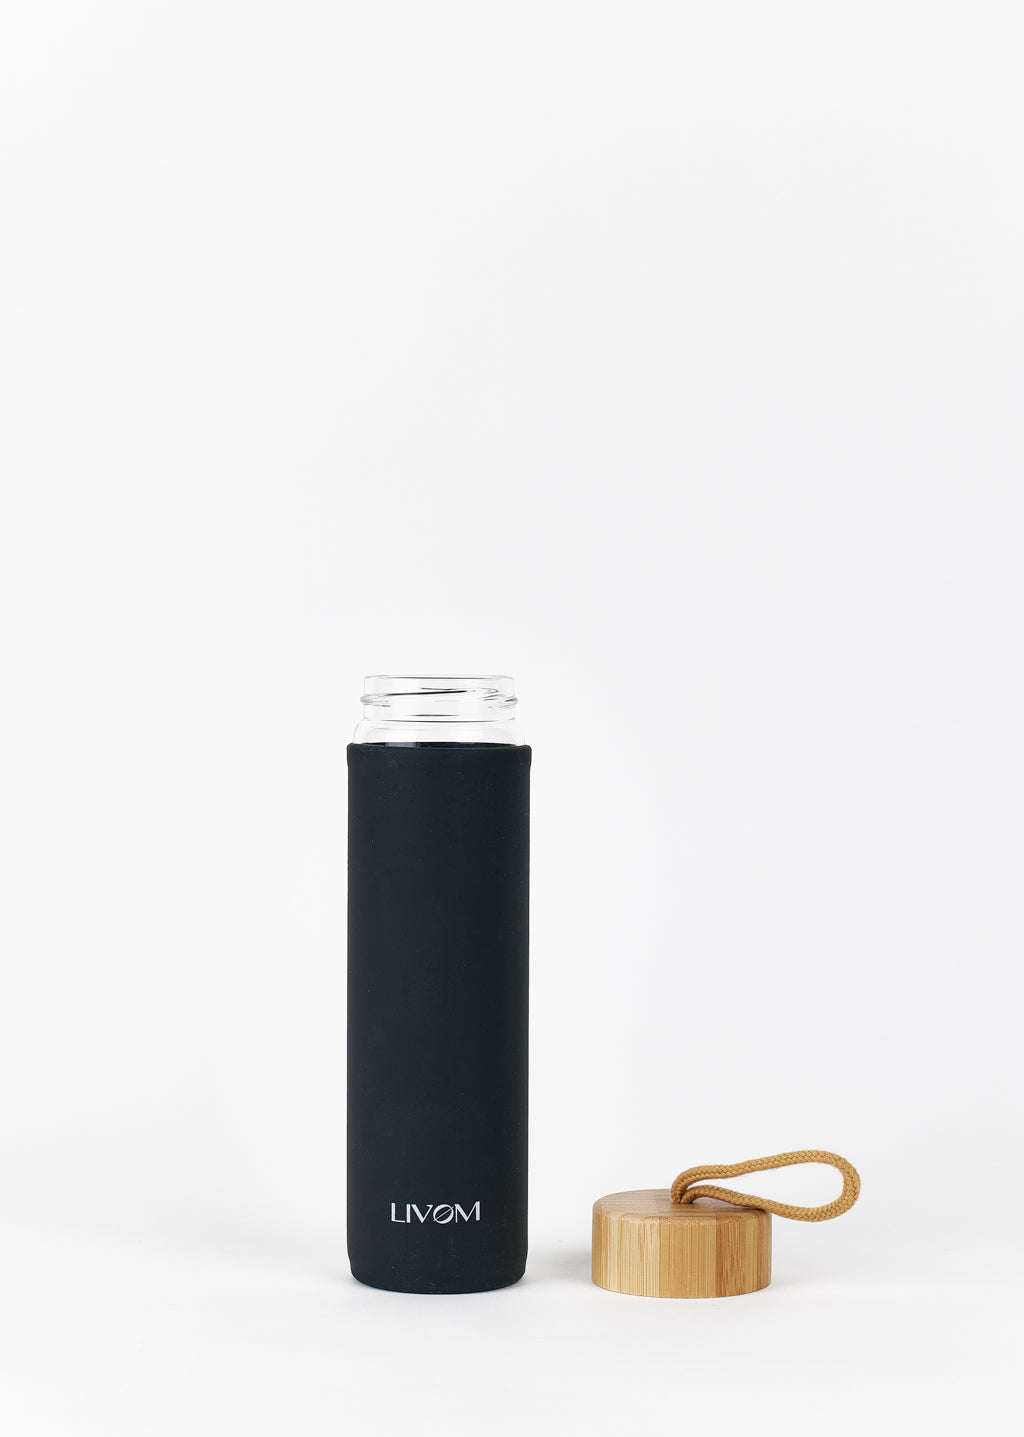 Reusable Glass Bottle with Bamboo Lid